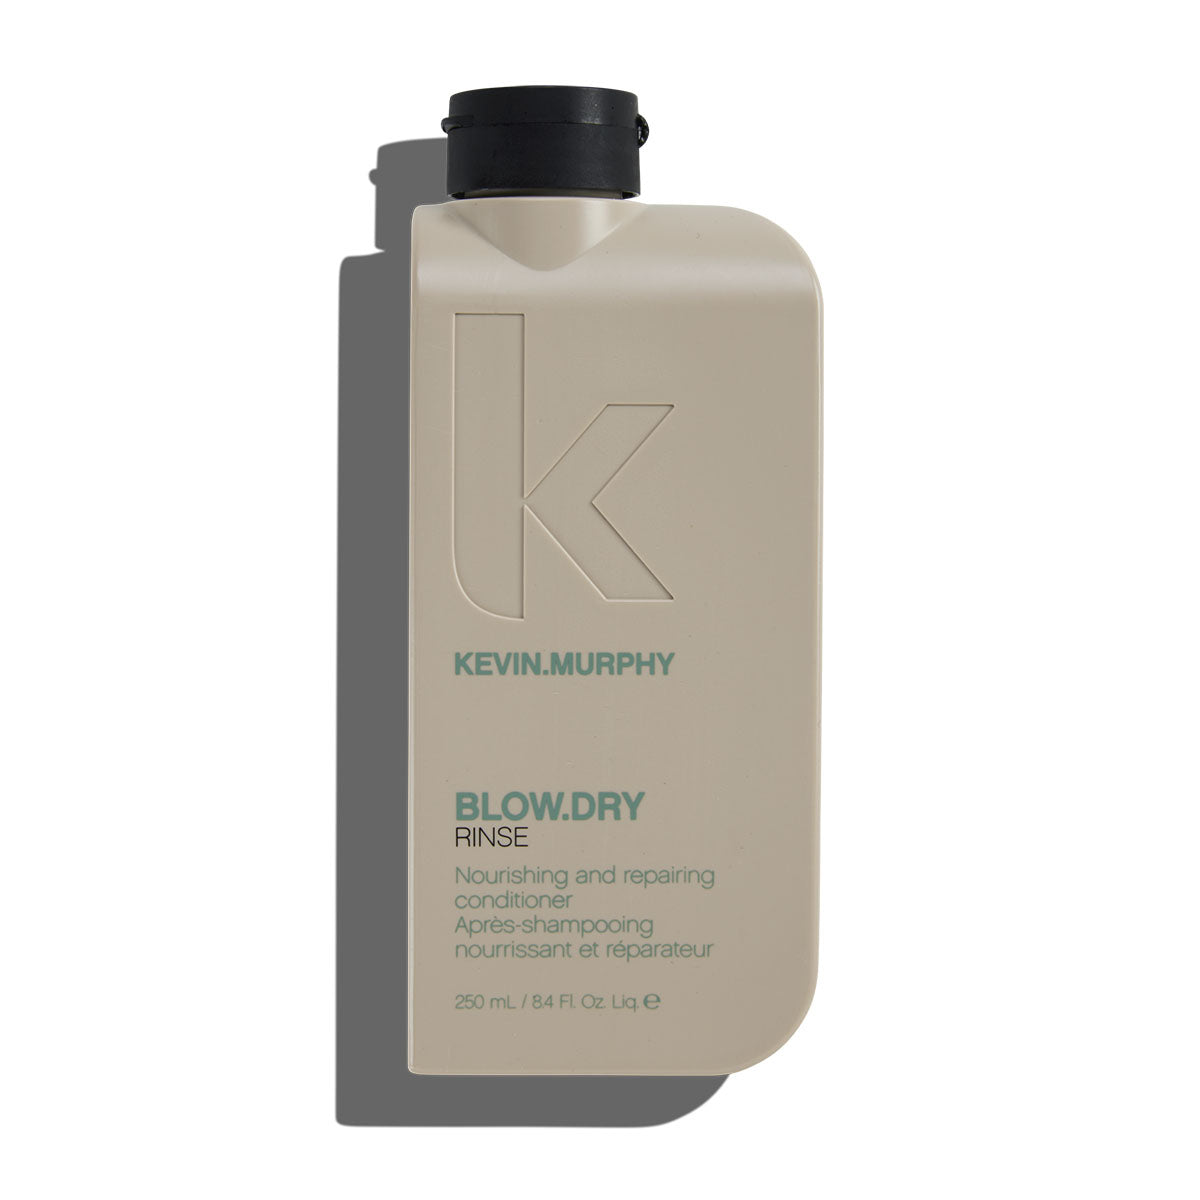 KEVIN.MURPHY Blow Dry Rinse 250ml